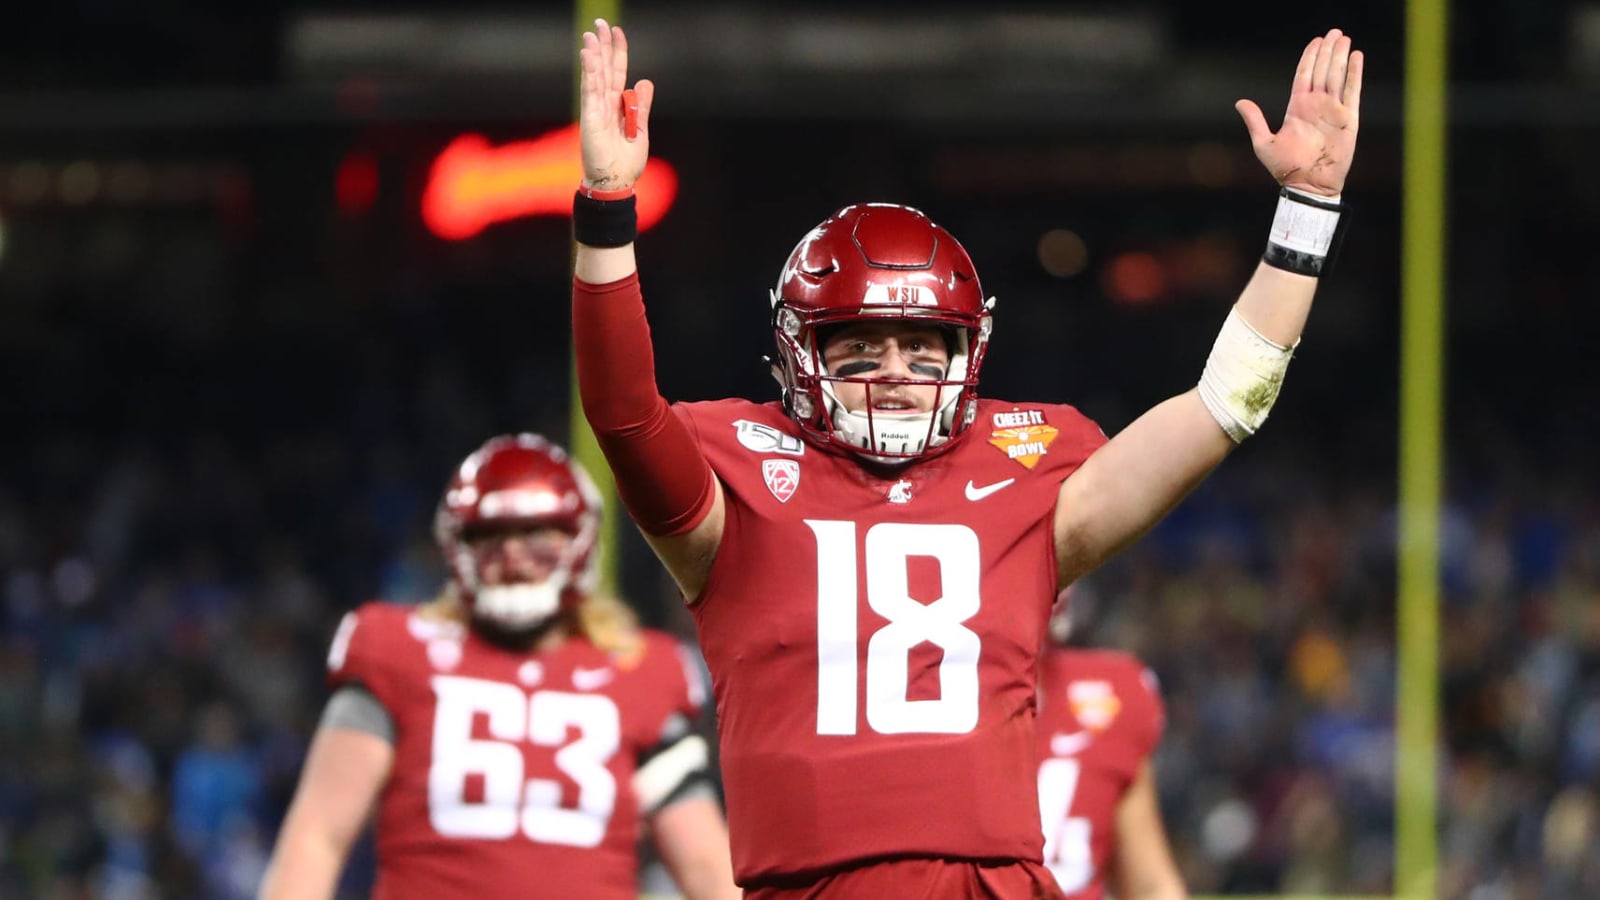 Big-name college players who will go in the later rounds of the 2020 NFL Draft